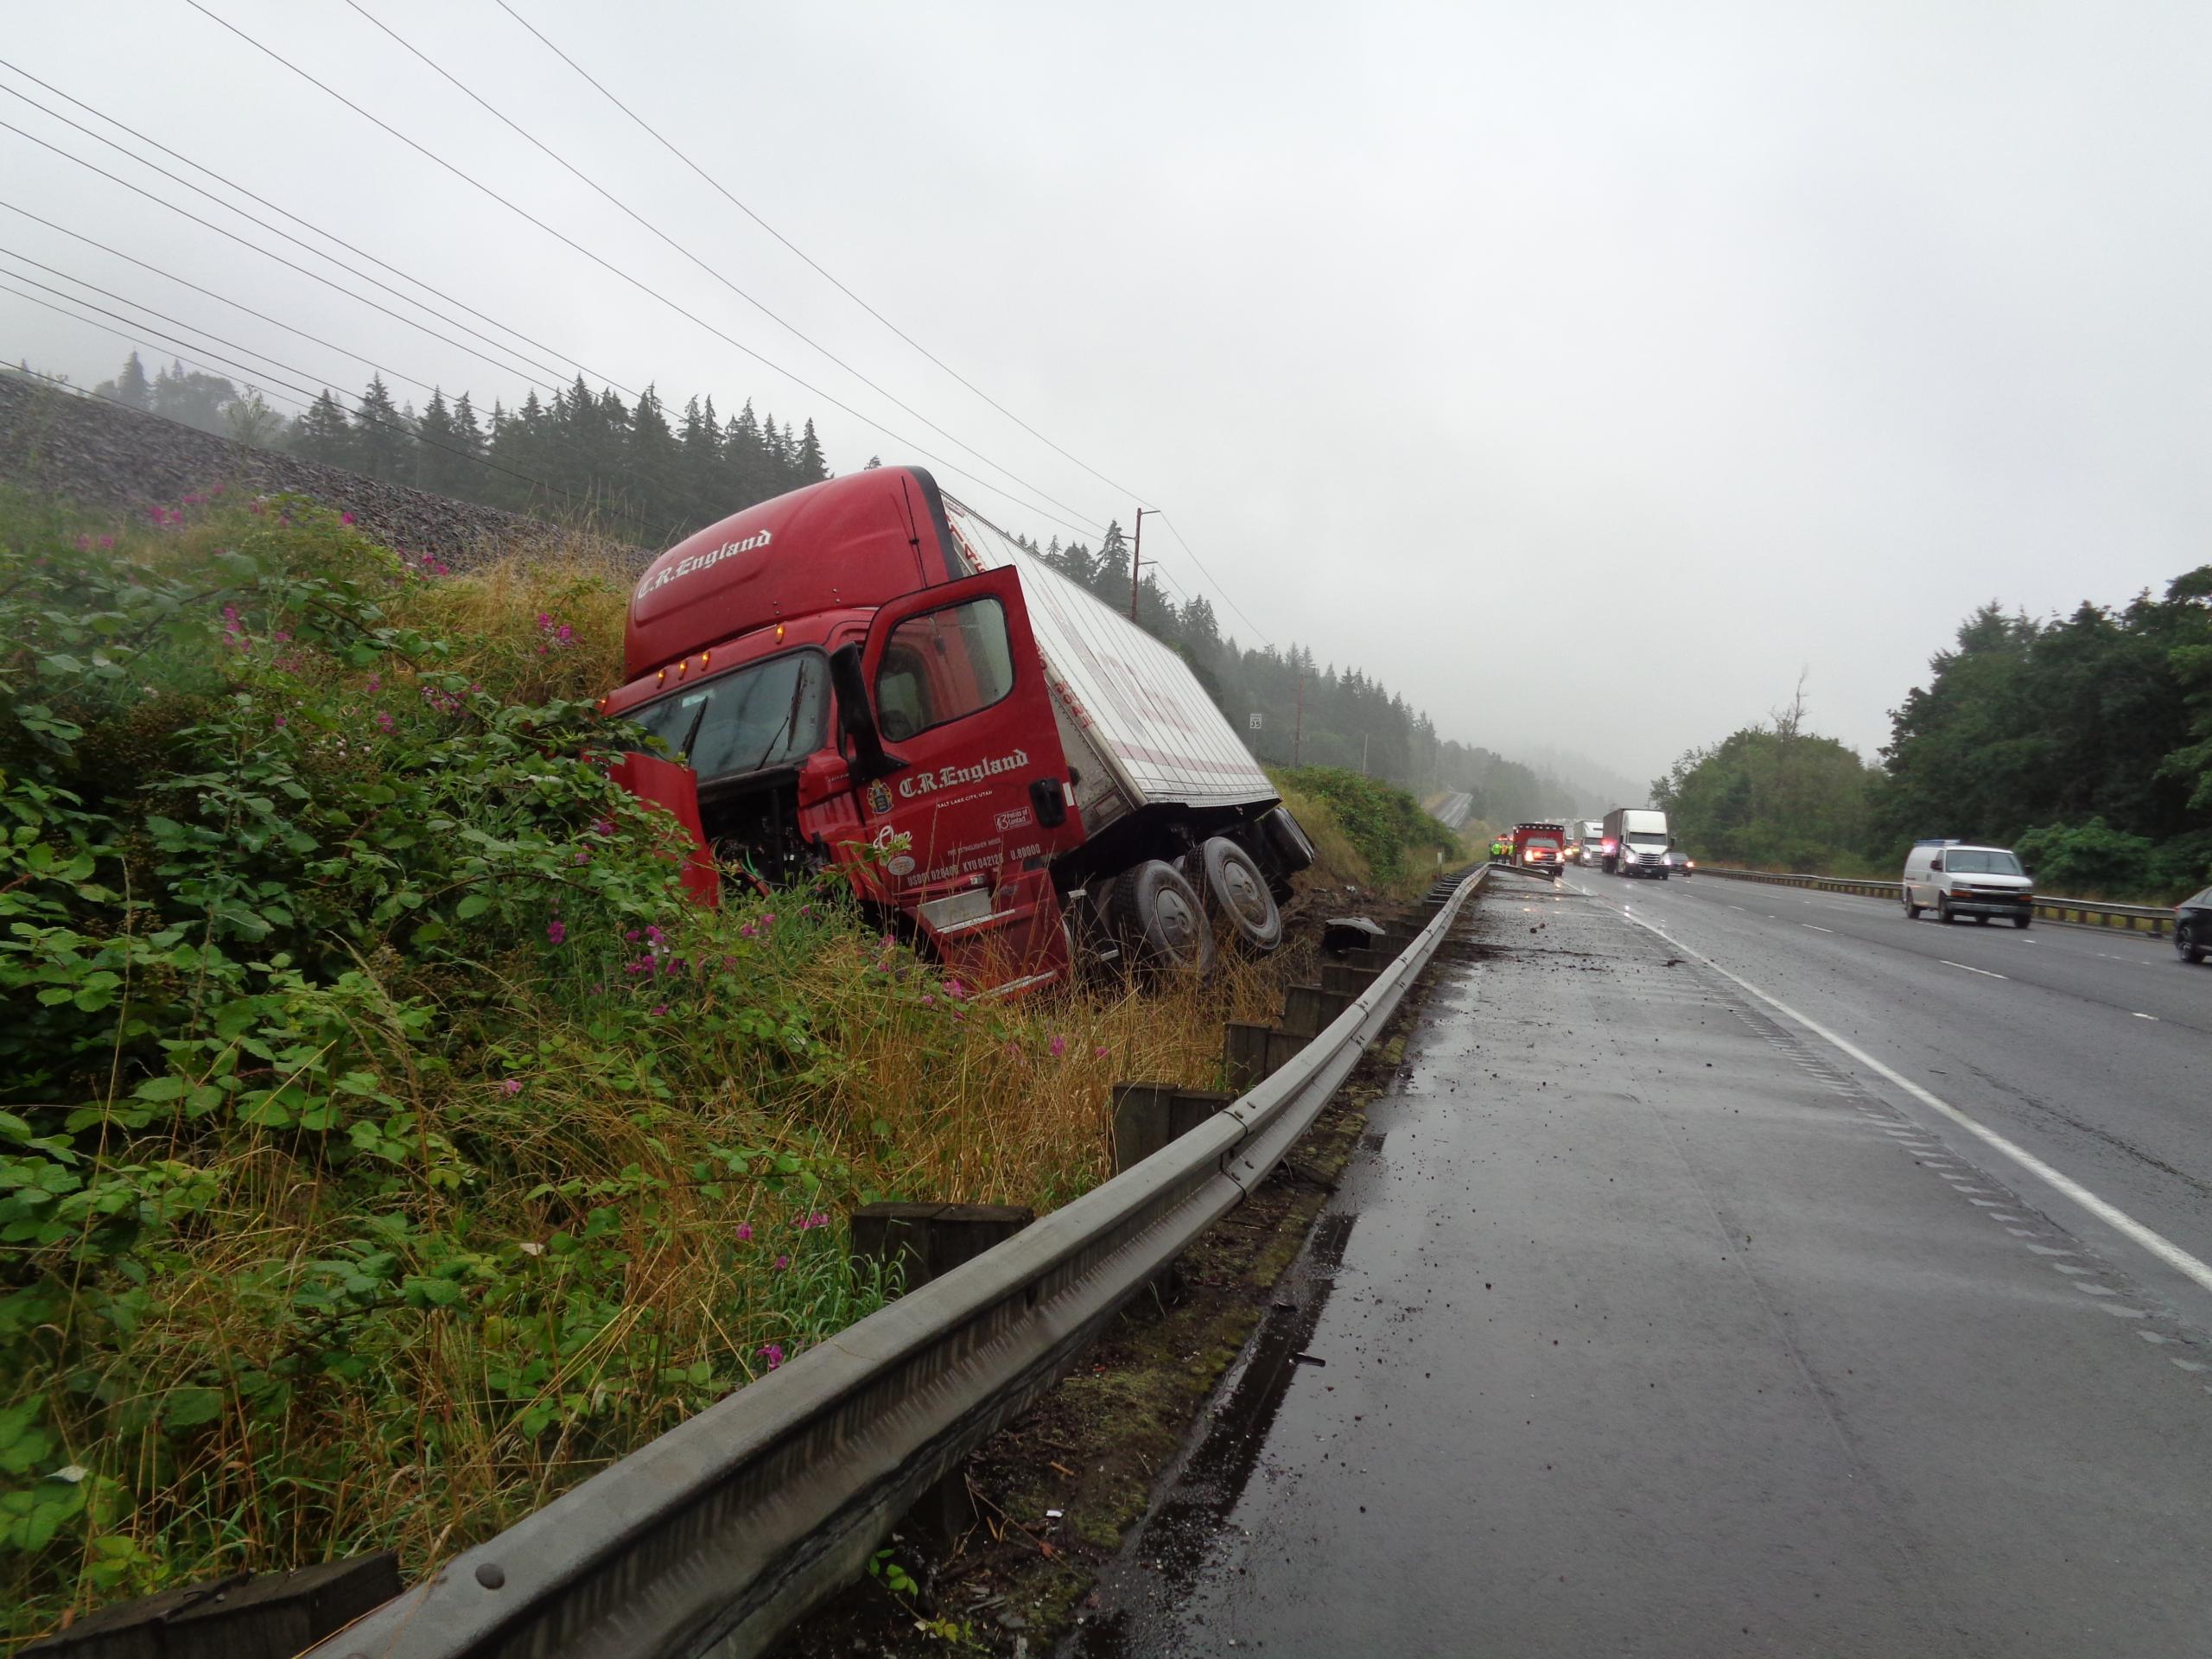 Traffic on northbound Interstate 5 at Milepost 26 in Cowlitz County may be slow into the evening due to a semitruck crash Thursday morning, according to Washington State Patrol.